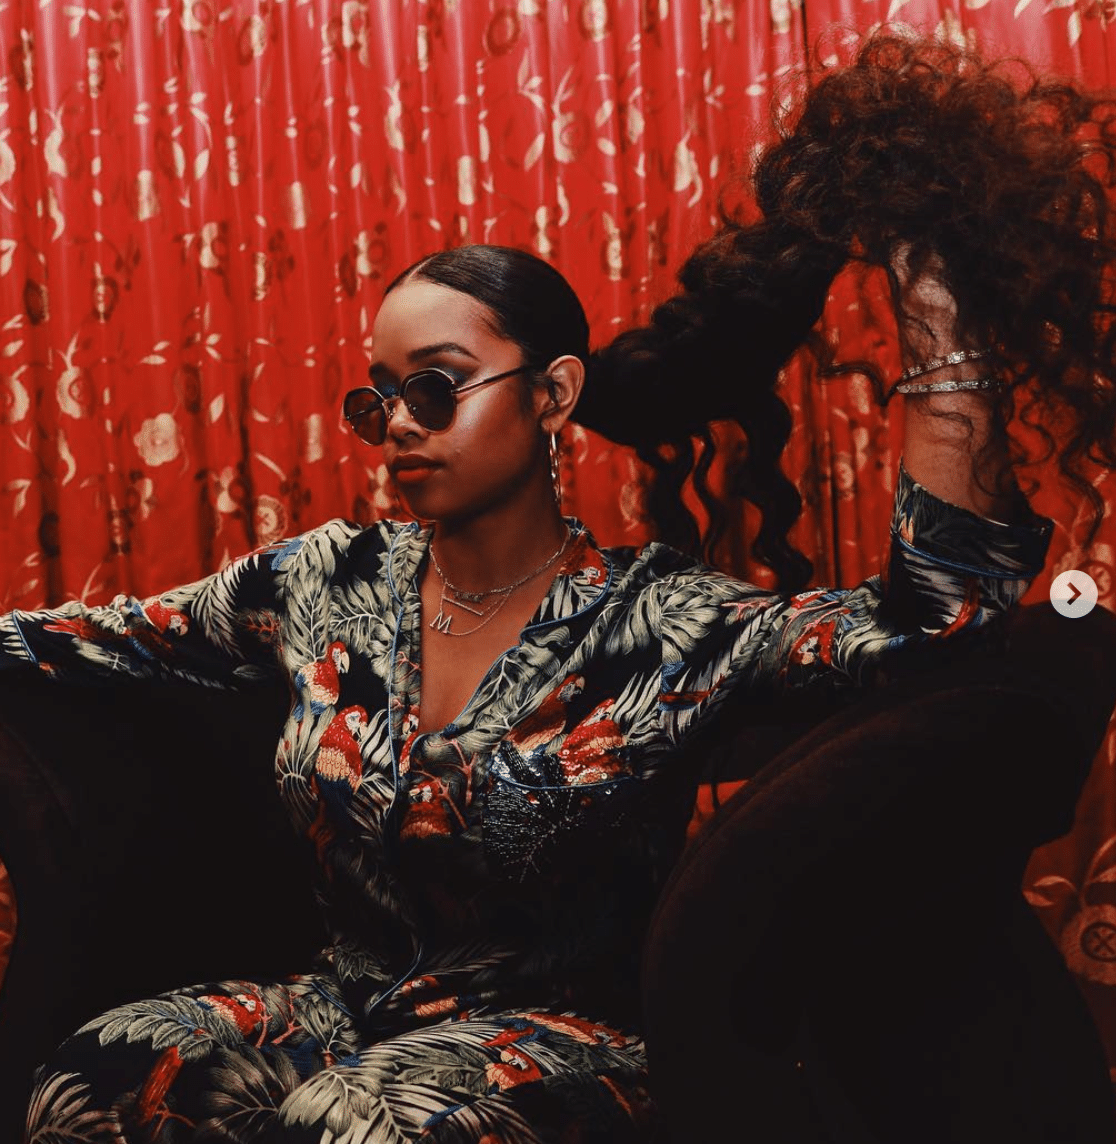 Off The Charts: A New Generation of Black Women Artists Is Disrupting R&B and Hip-Hop